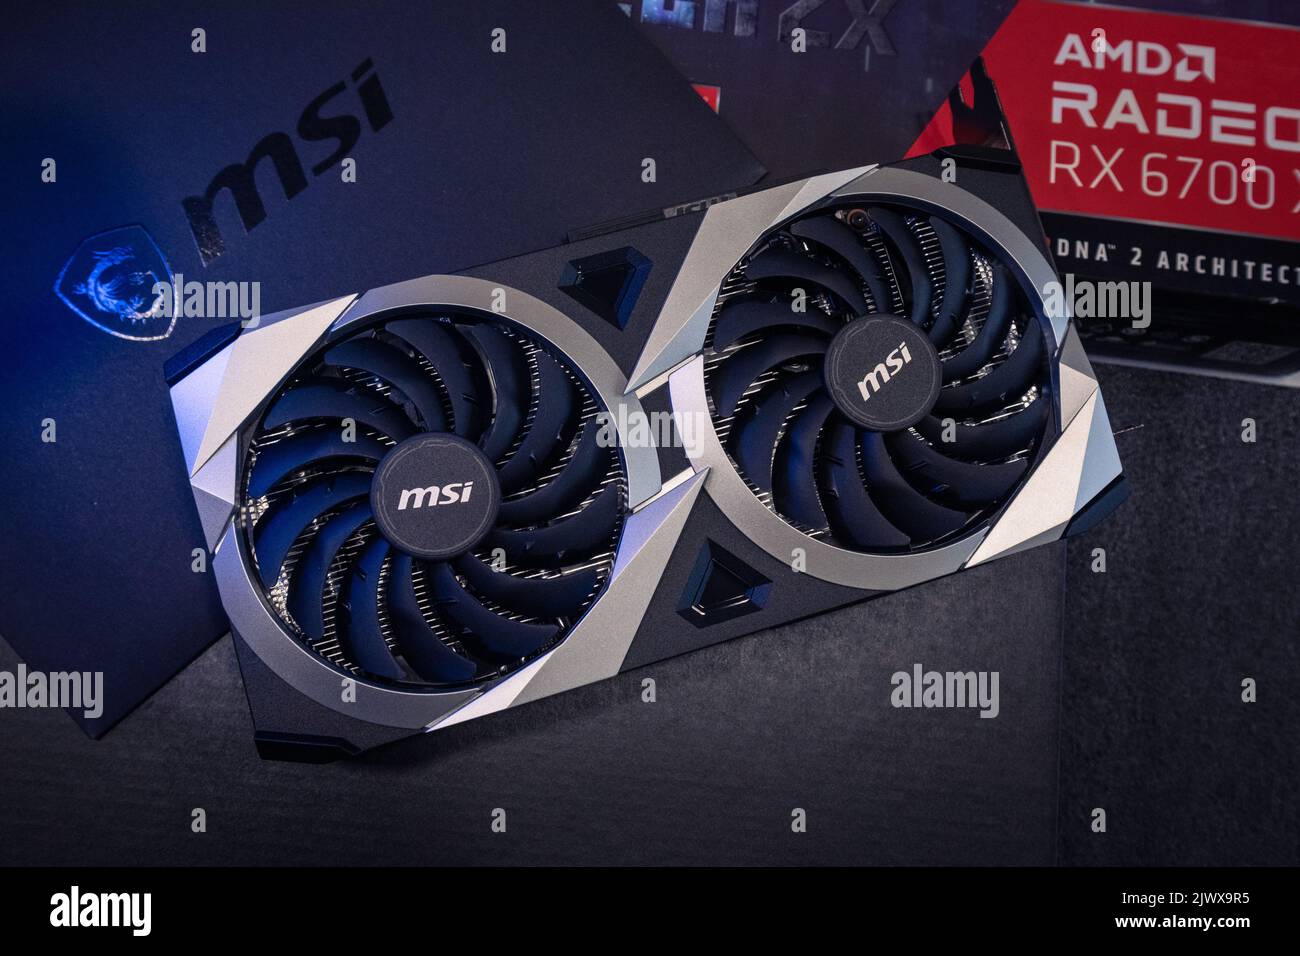 Kyiv, Ukraine - August 19, 2022: MSI MECH 2X graphics video card with AMD Radeon RX6700XT chipset unboxing in blue light, close-up with box Stock Photo